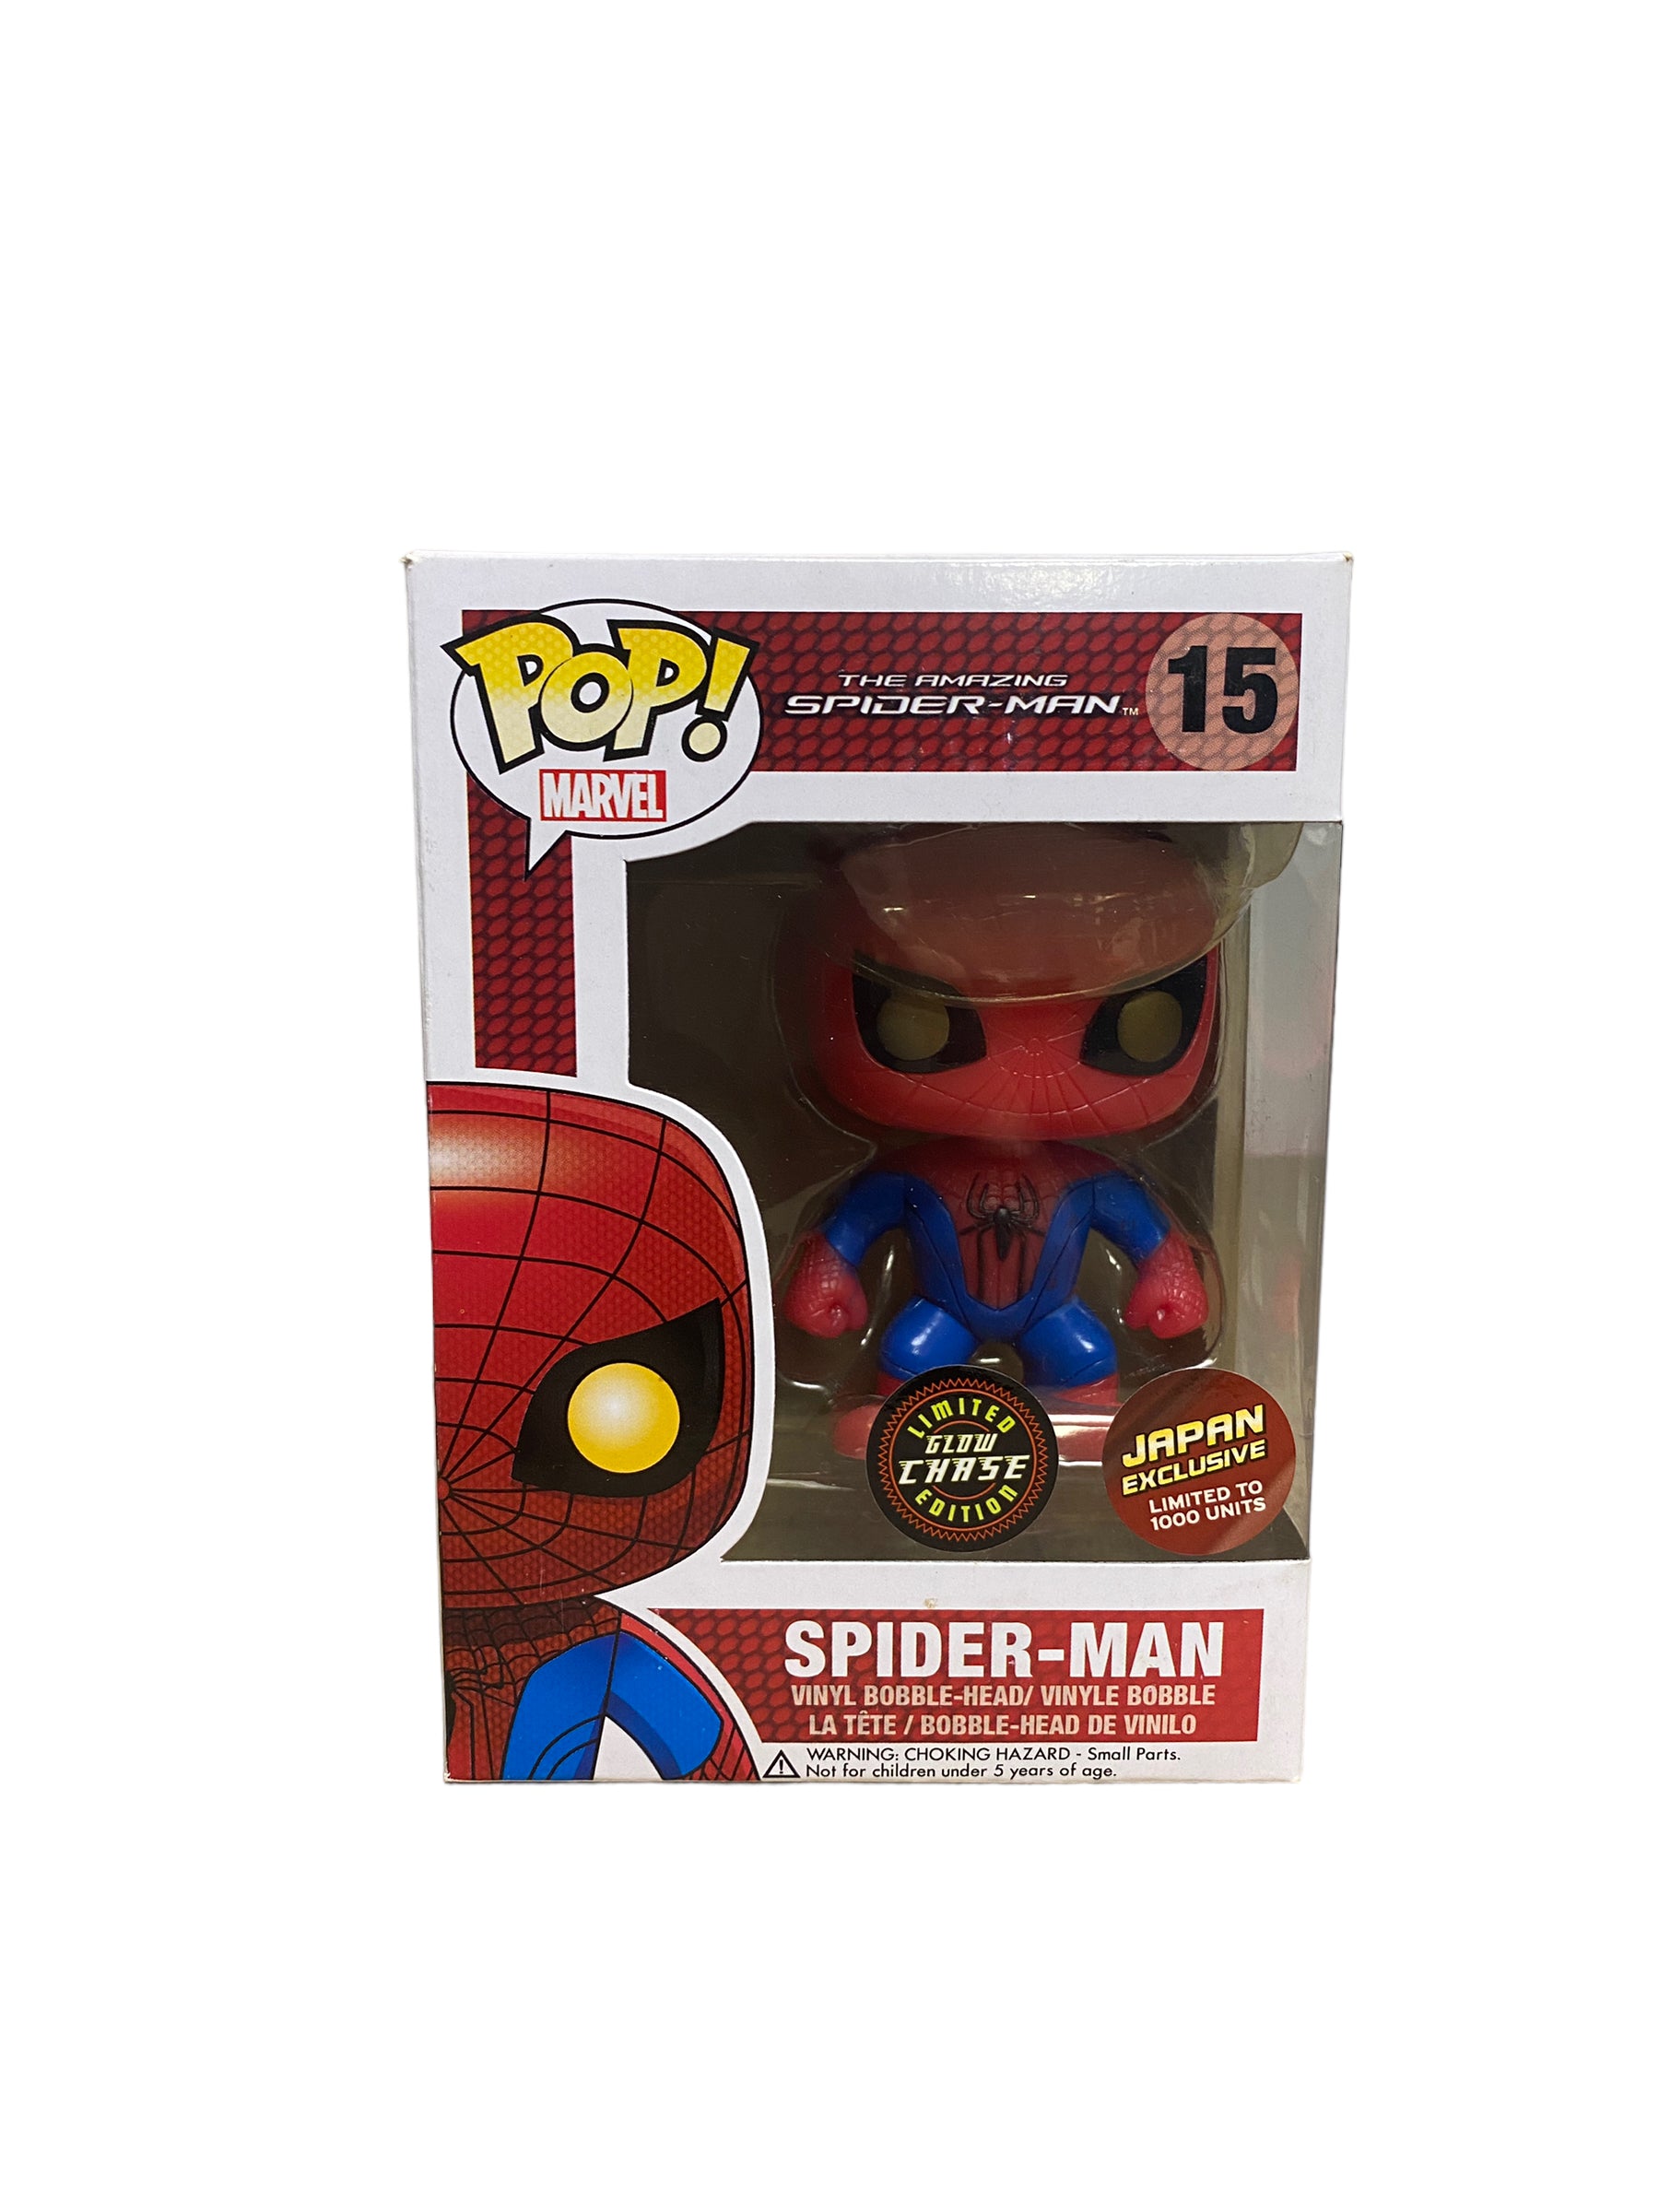 Spider-Man #15 (Glow Chase) Funko Pop! - The Amazing Spider-Man - Japan Exclusive LE1000 Pcs - Condition 8/10